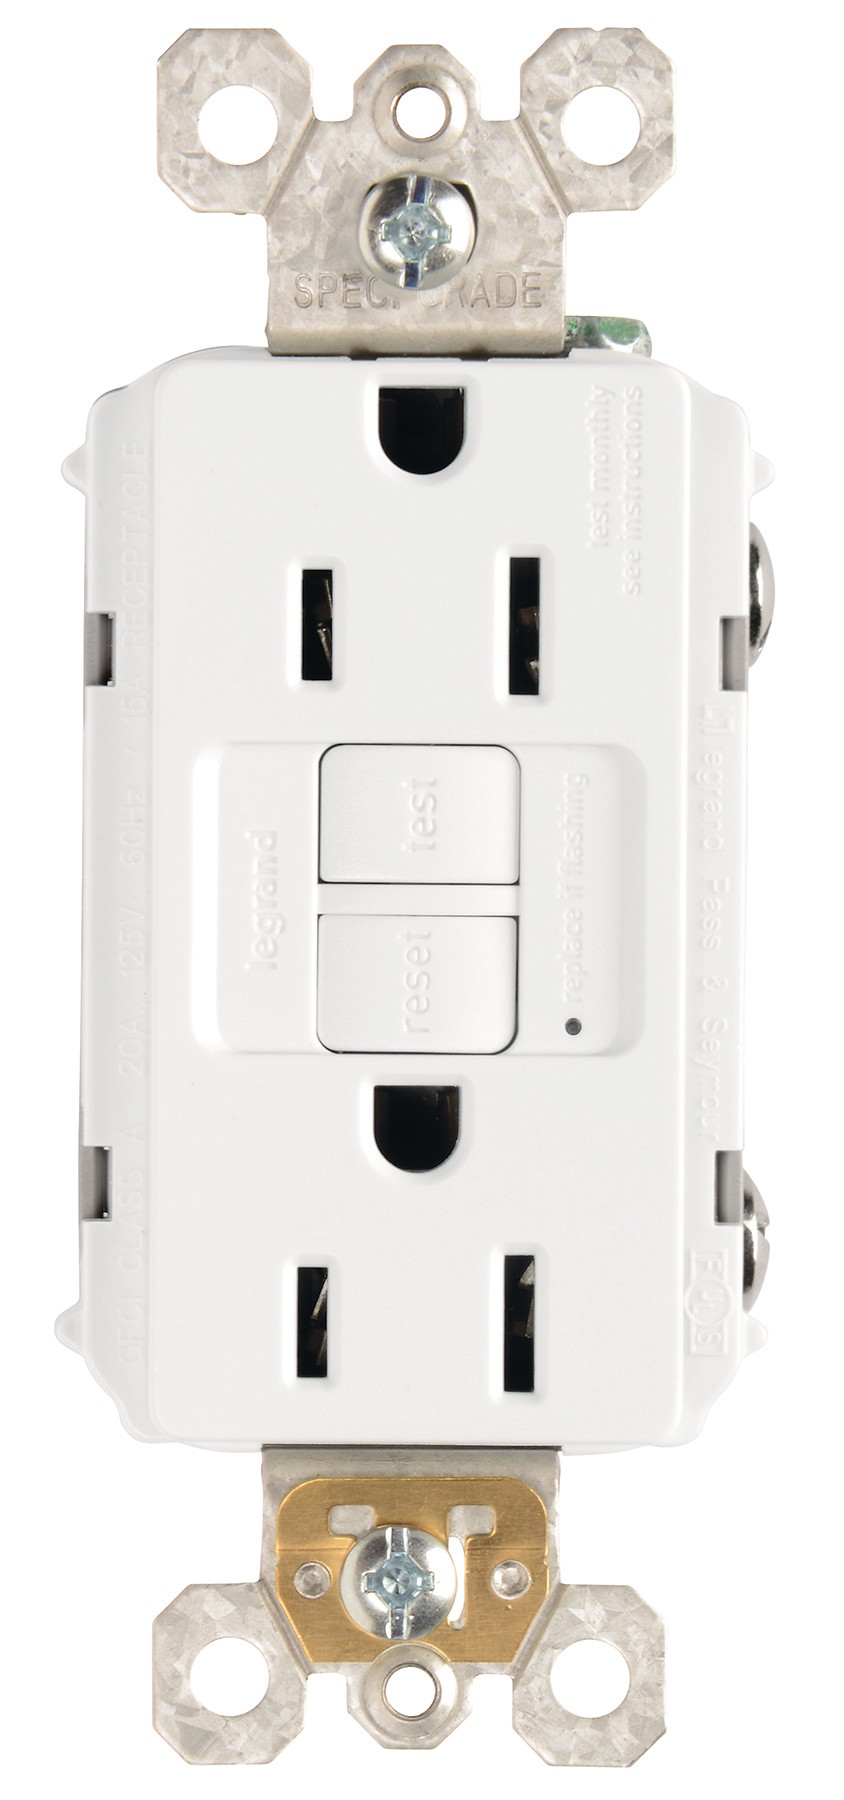 Details about   Pass & Seymour 1597W White 15A 125V Self-Test GFCI Receptacle NIB NEW 